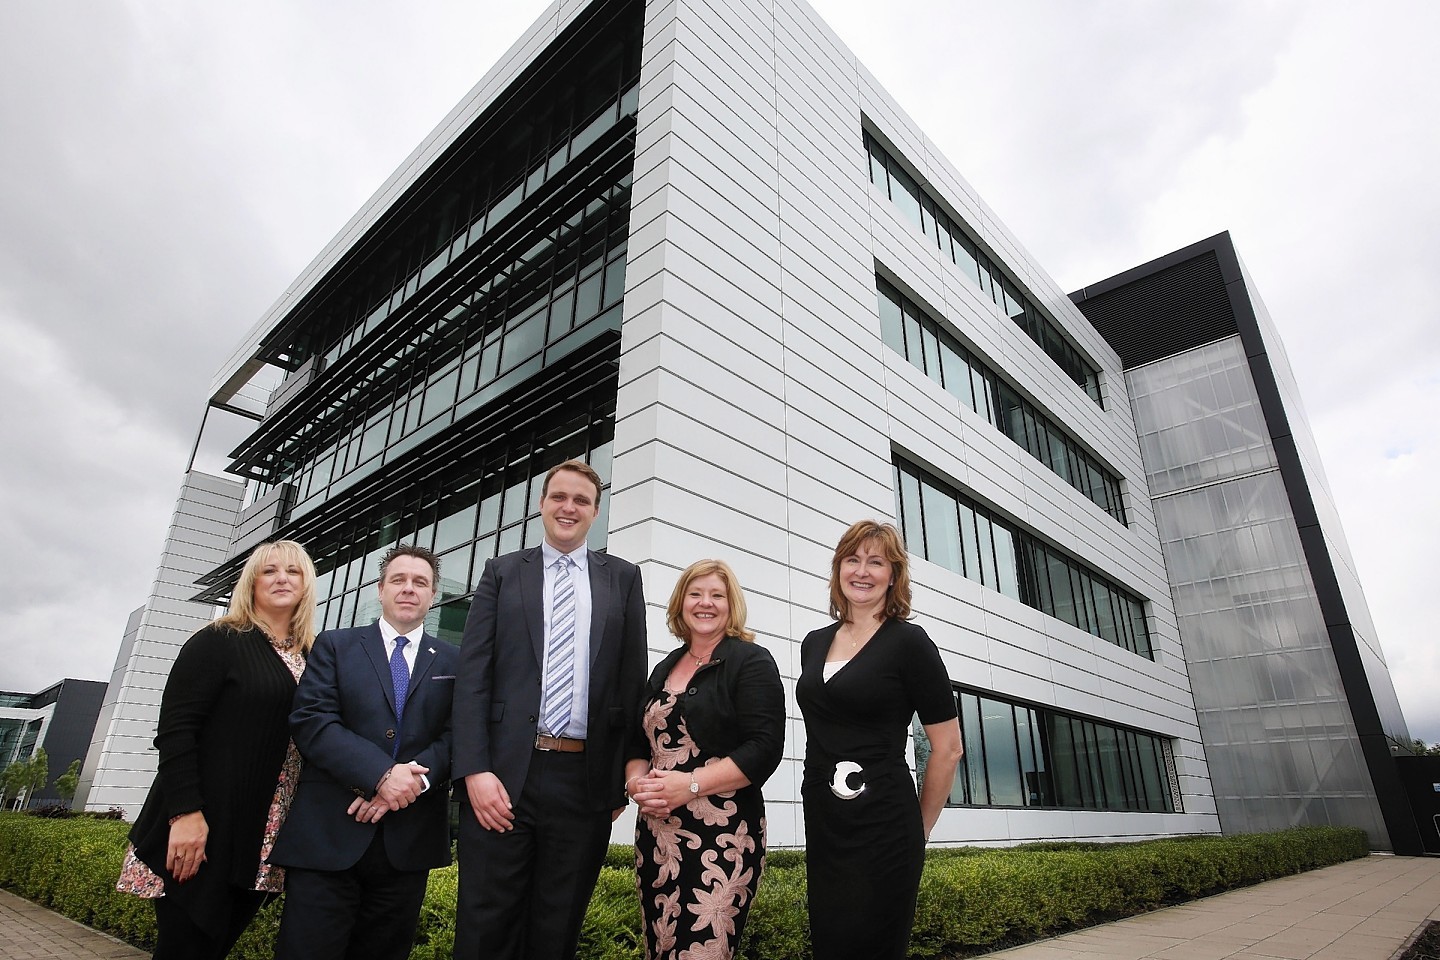 Left to right: TC BioPharm’s Angela Scott, David Gallagher and chief executive Mike Leek, with Investing Women founder Jackie Waring and Lorraine Porter